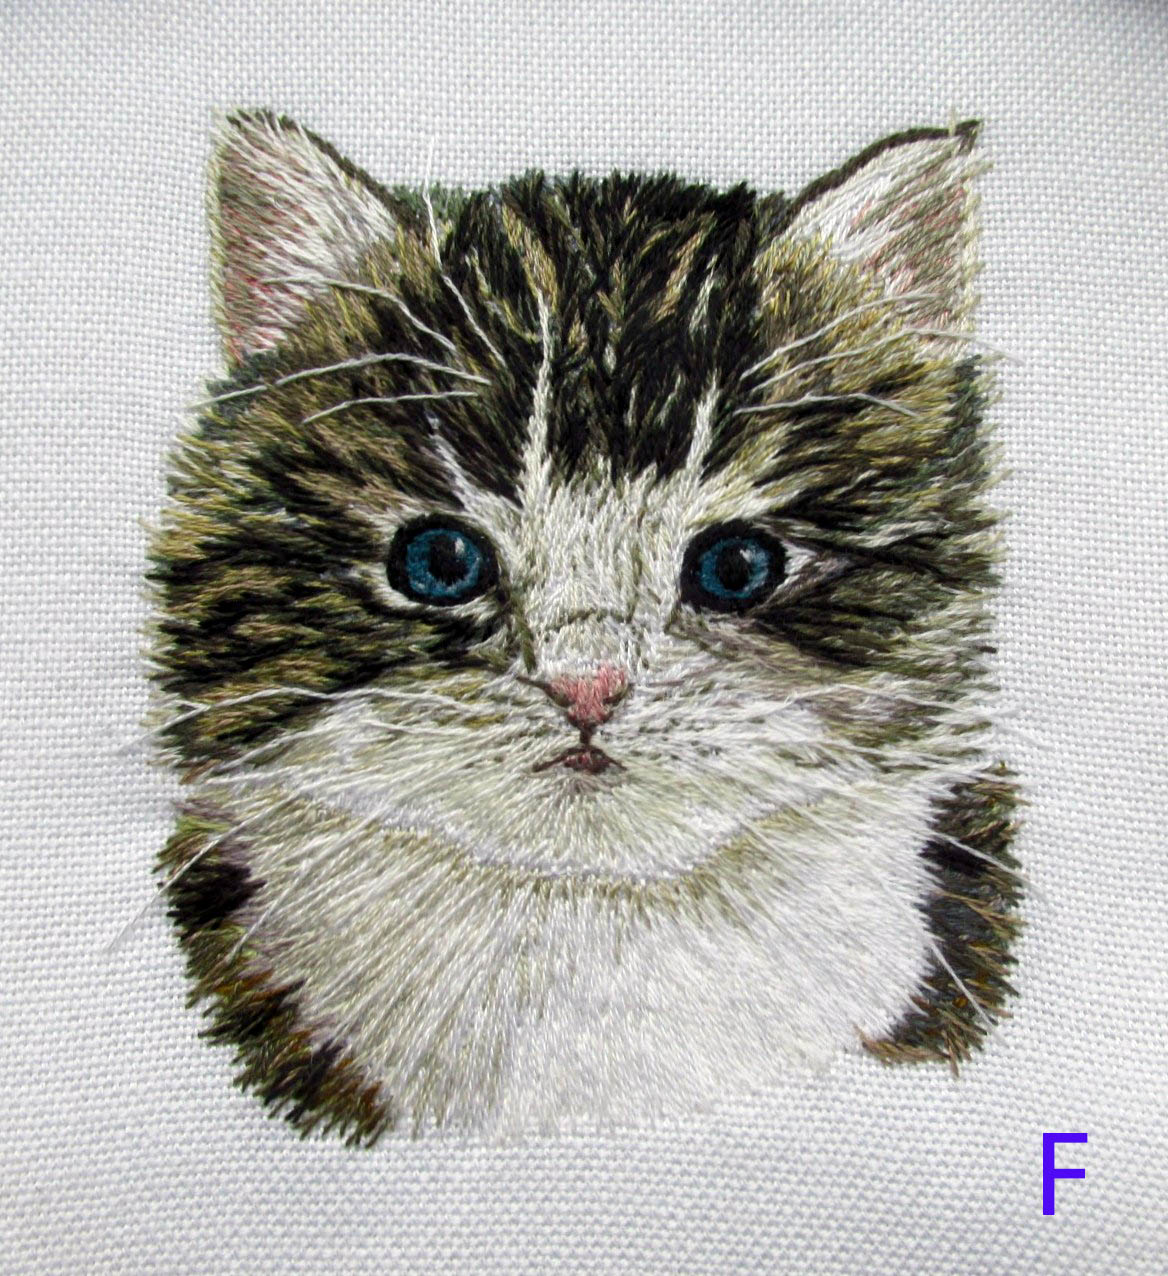 ALL YOU NEED IS THE LOVE OF A CAT!, needle painting with added embroidery stitches, Rose Bowl competition 2021